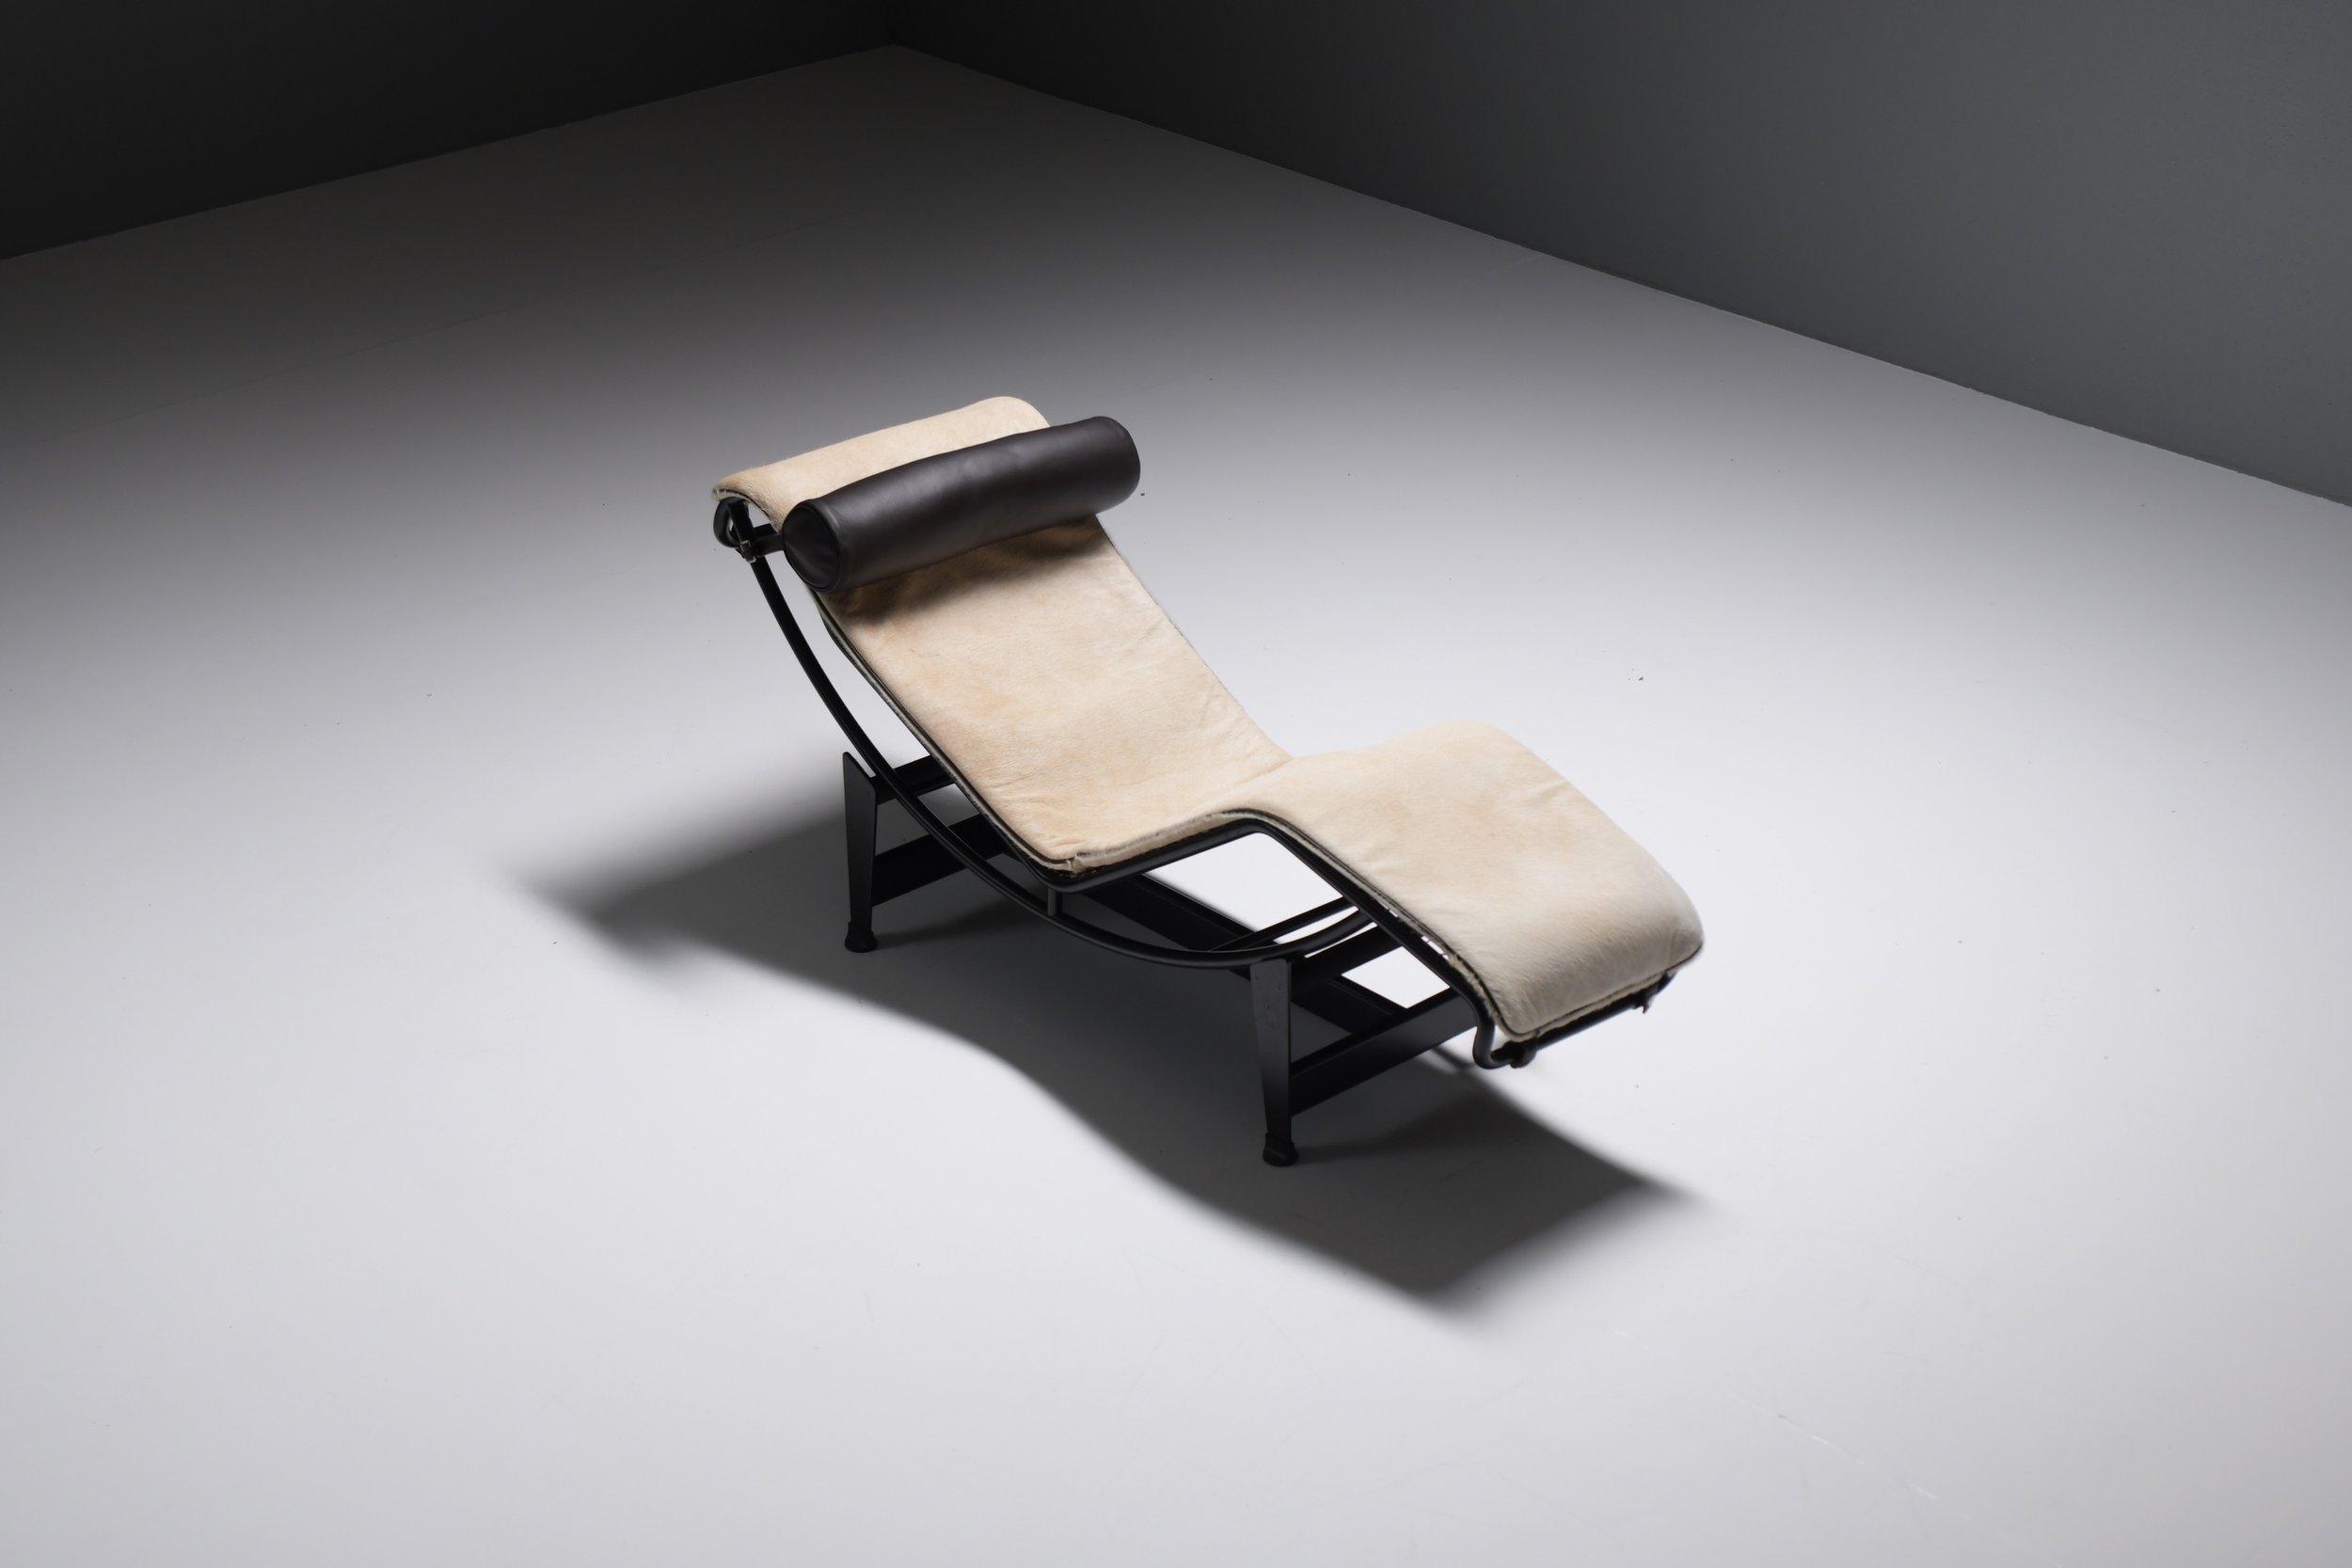 LC4 Chaise Longue 1928 by Le Corbusier, Charlotte Perriand and